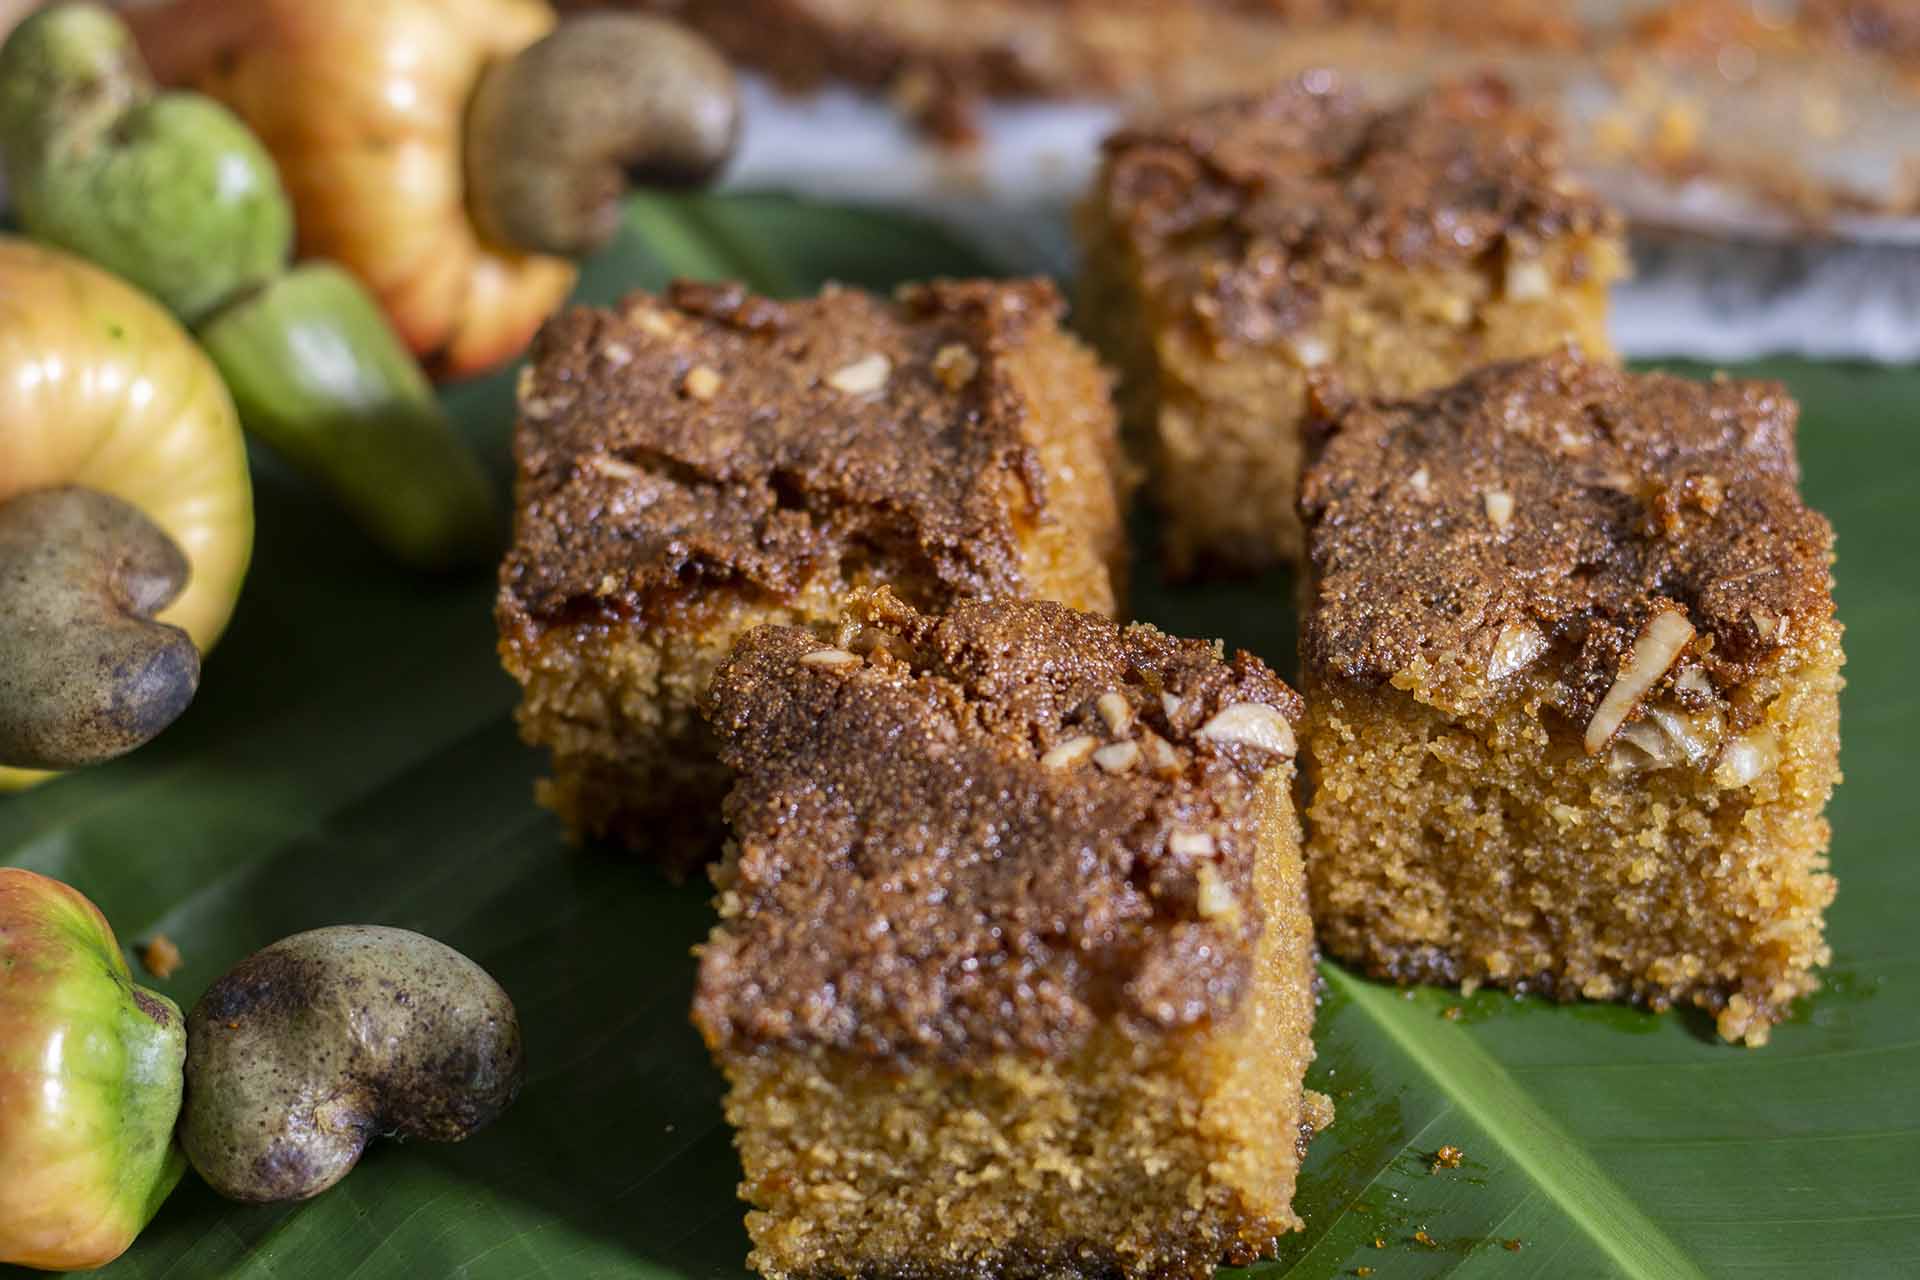 Pieces of Jaggery Cake